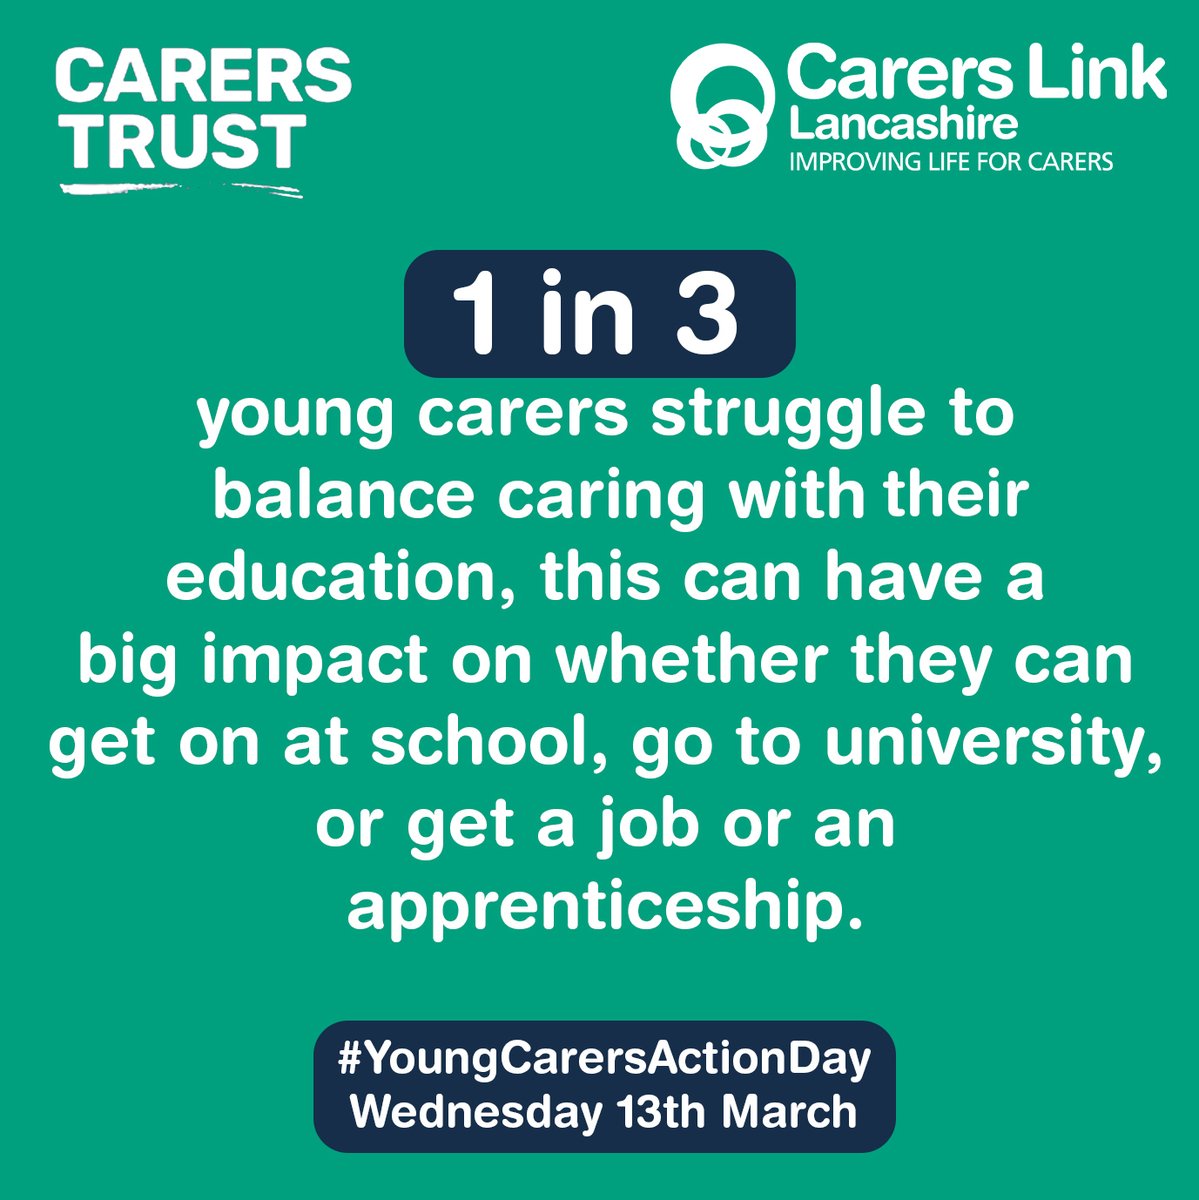 #YOUNGCARERSACTIONDAY is 3 days away.
Our stat for you for today, is that 1 in 3 young carers struggle to balance caring with their education. This year, YCAD hopes to raise awareness around this to allow #fairfuturesforyoungcarers